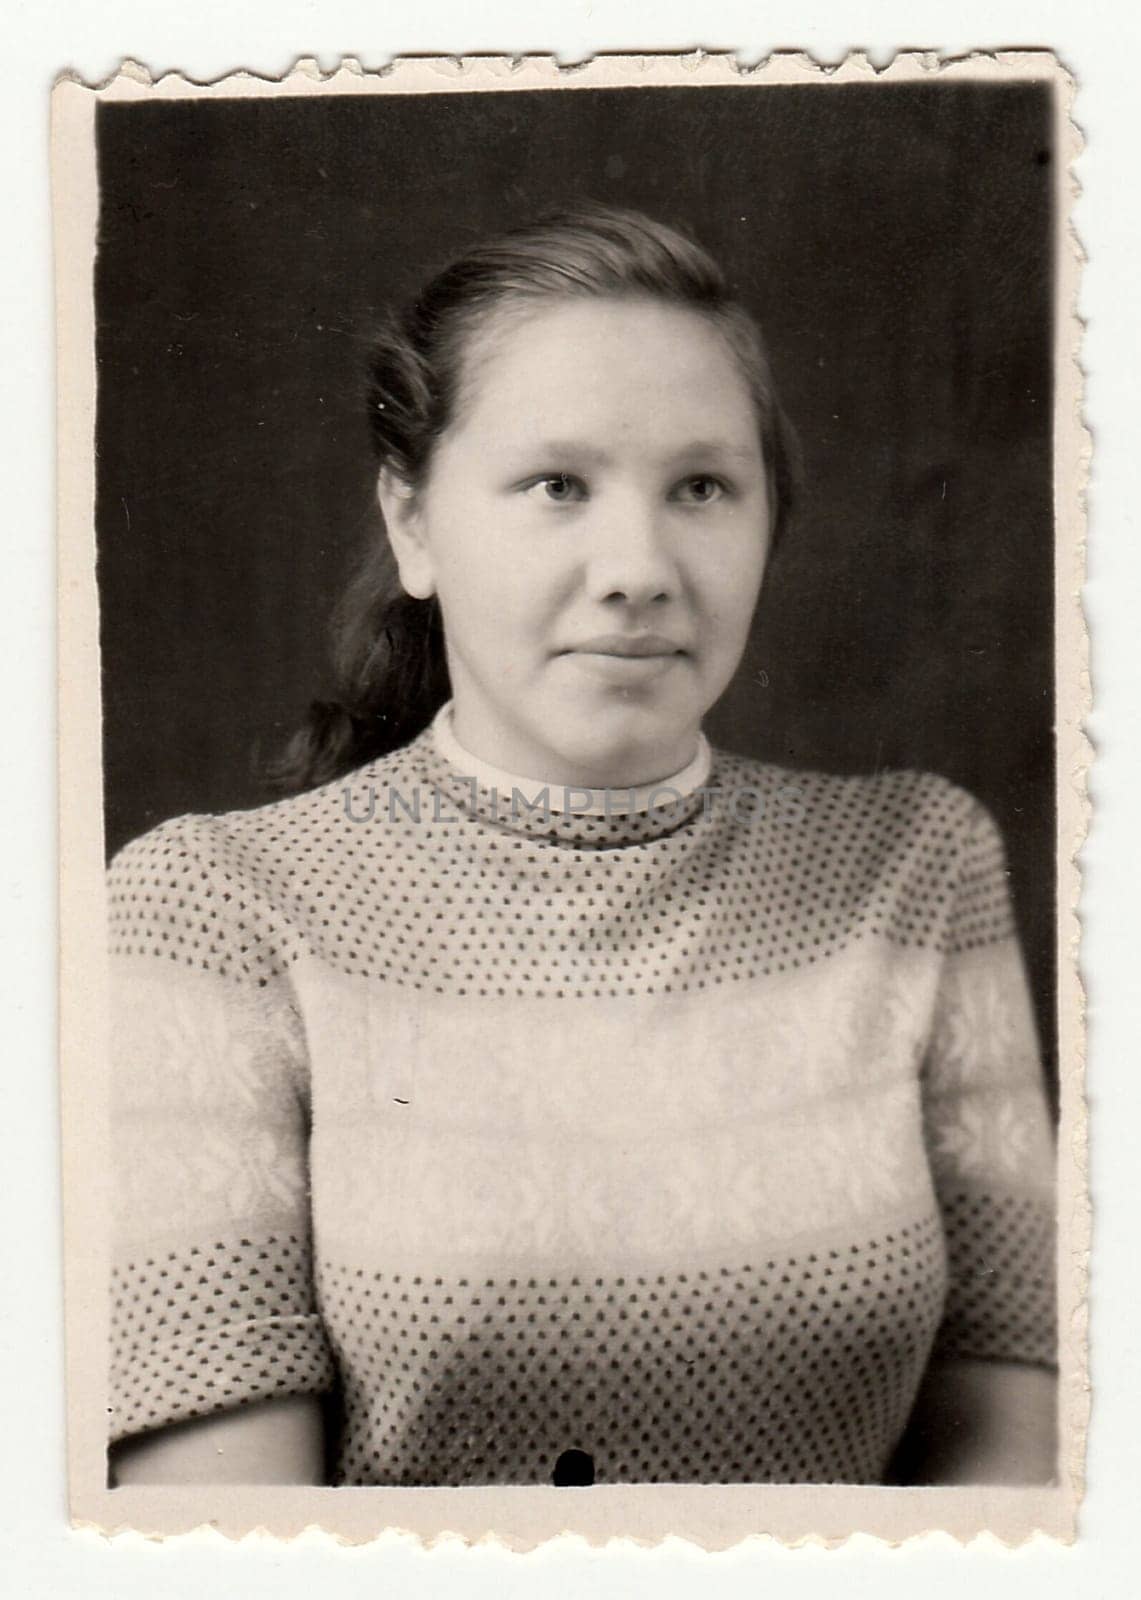 USSR - FEBRUARY 29, 1952: Vintage portrait shows a young woman. Black and white antique photo.